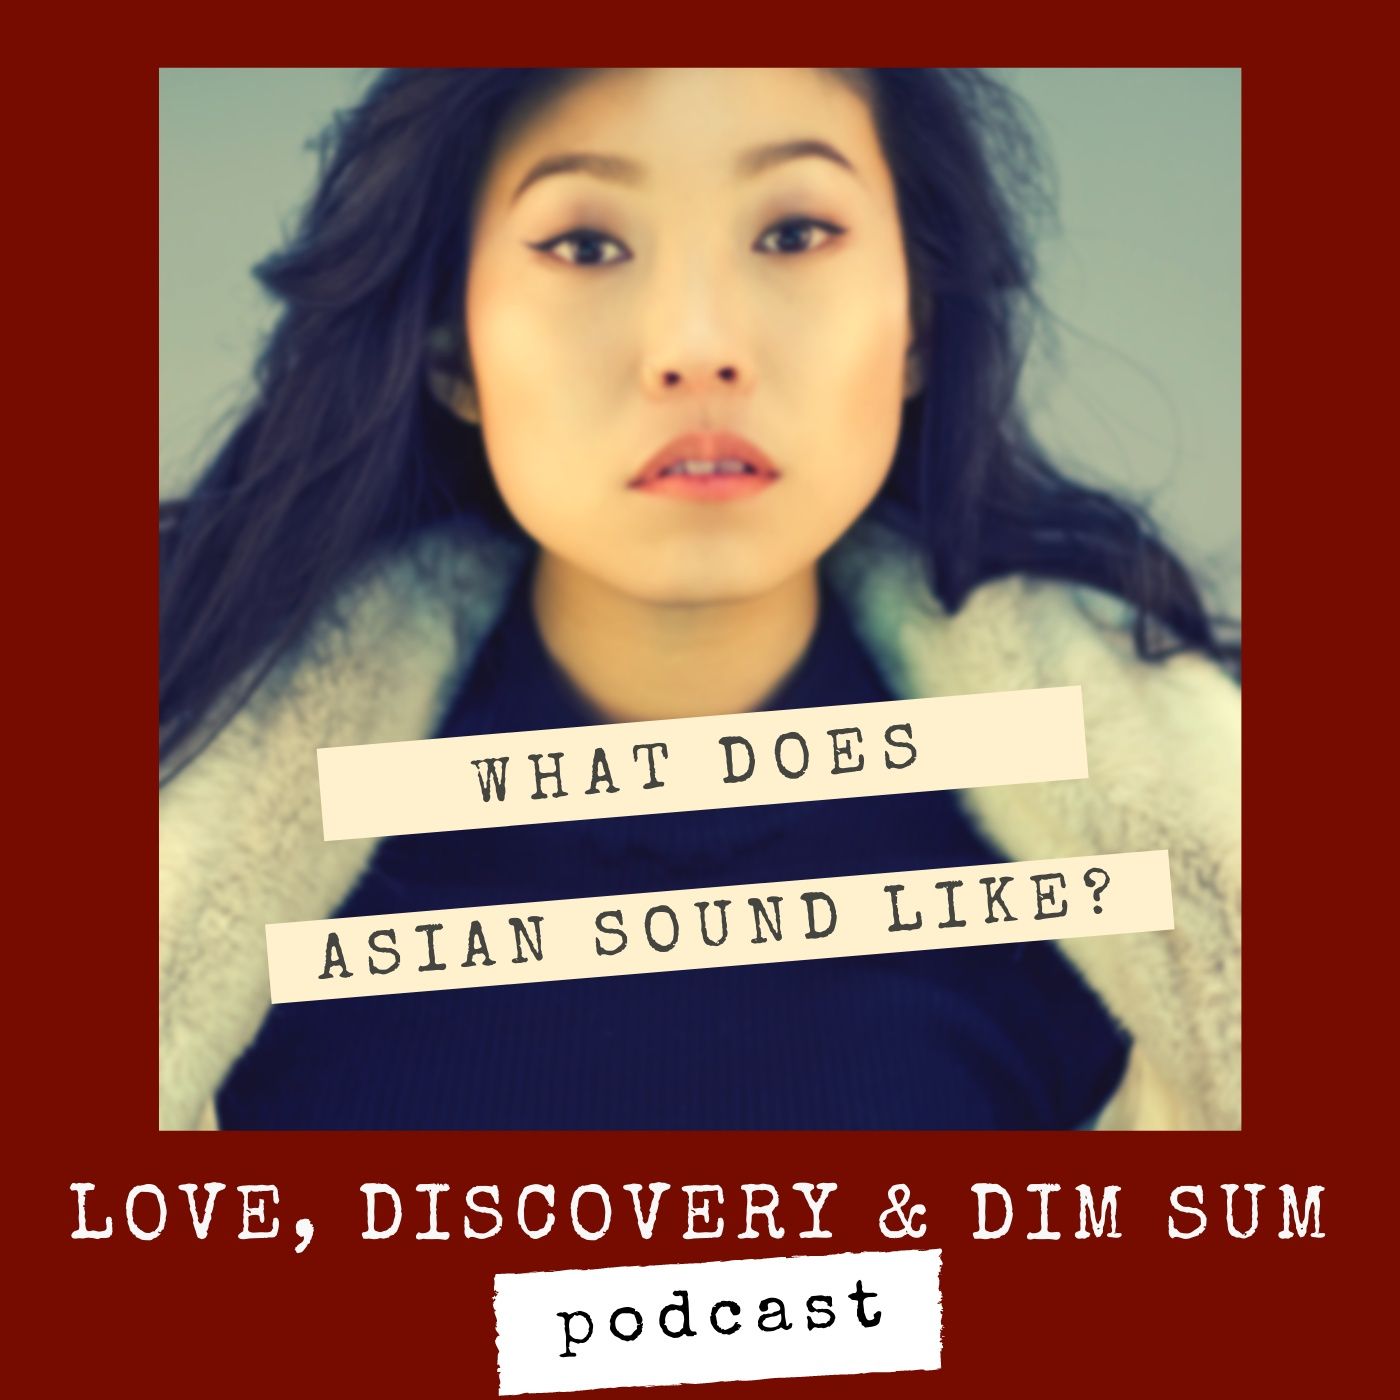 What Does Asian Sound Like?